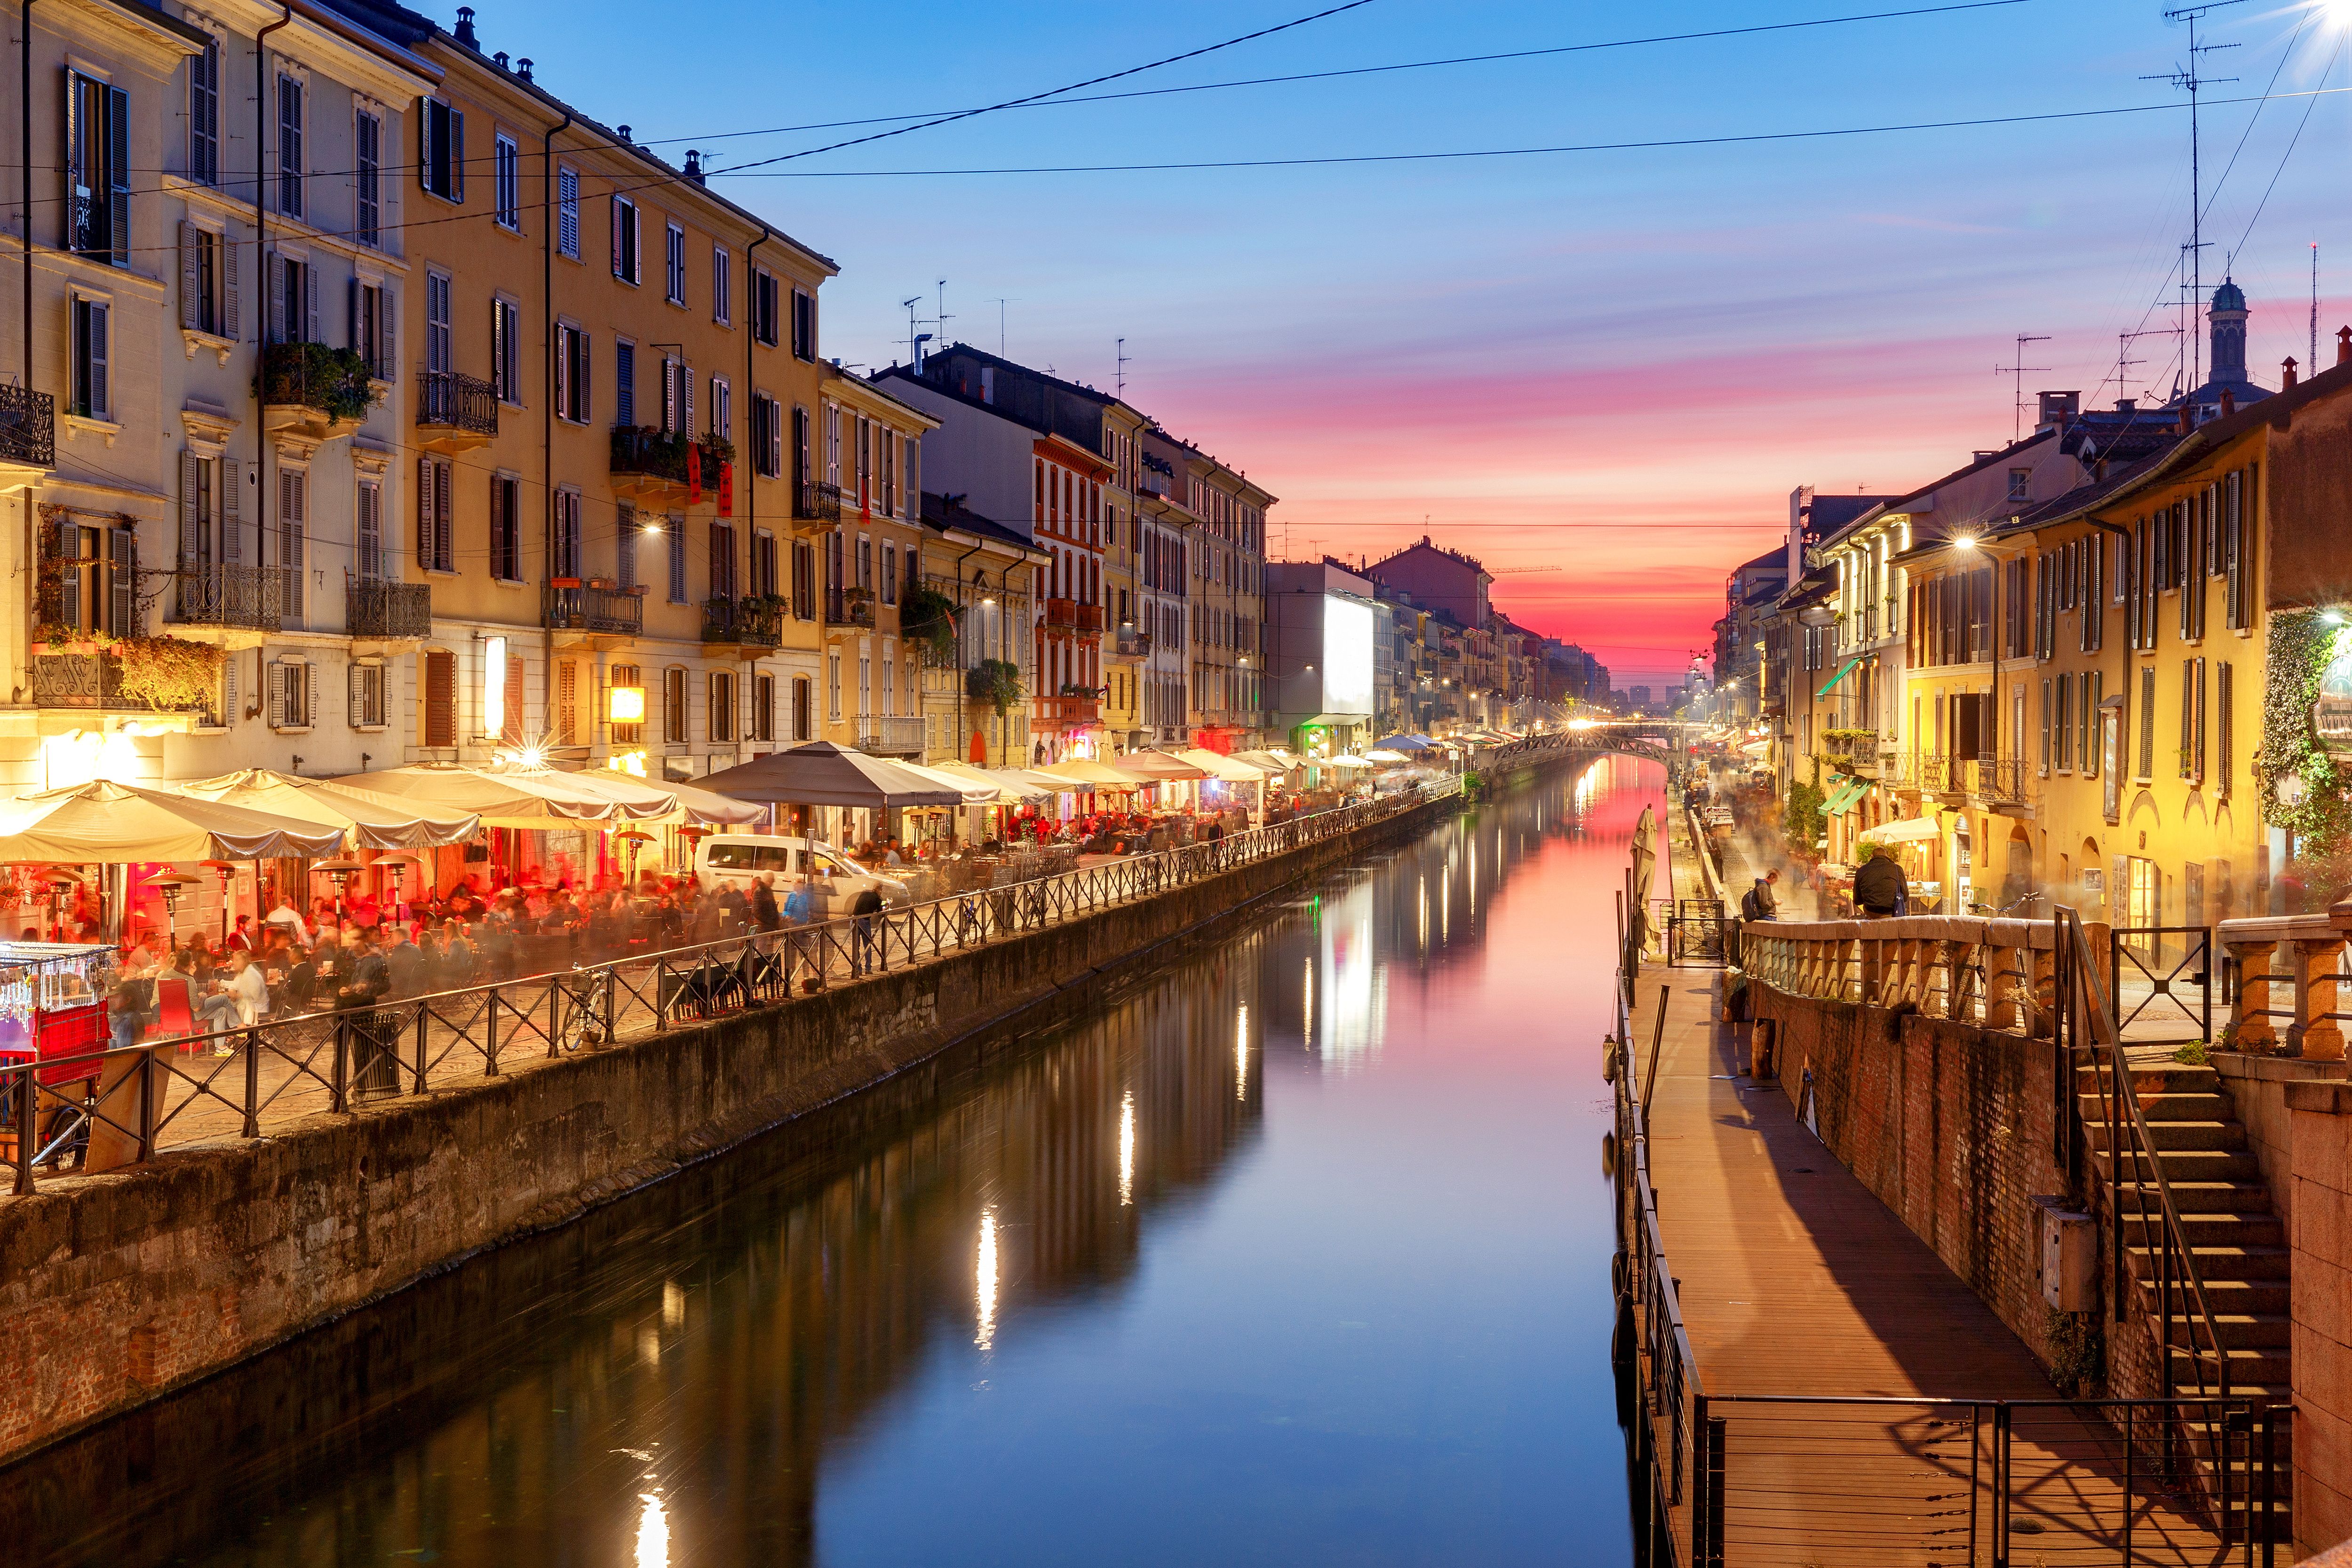 A popular dining spot in Milan - Canal Naviglio Grande at sunset.